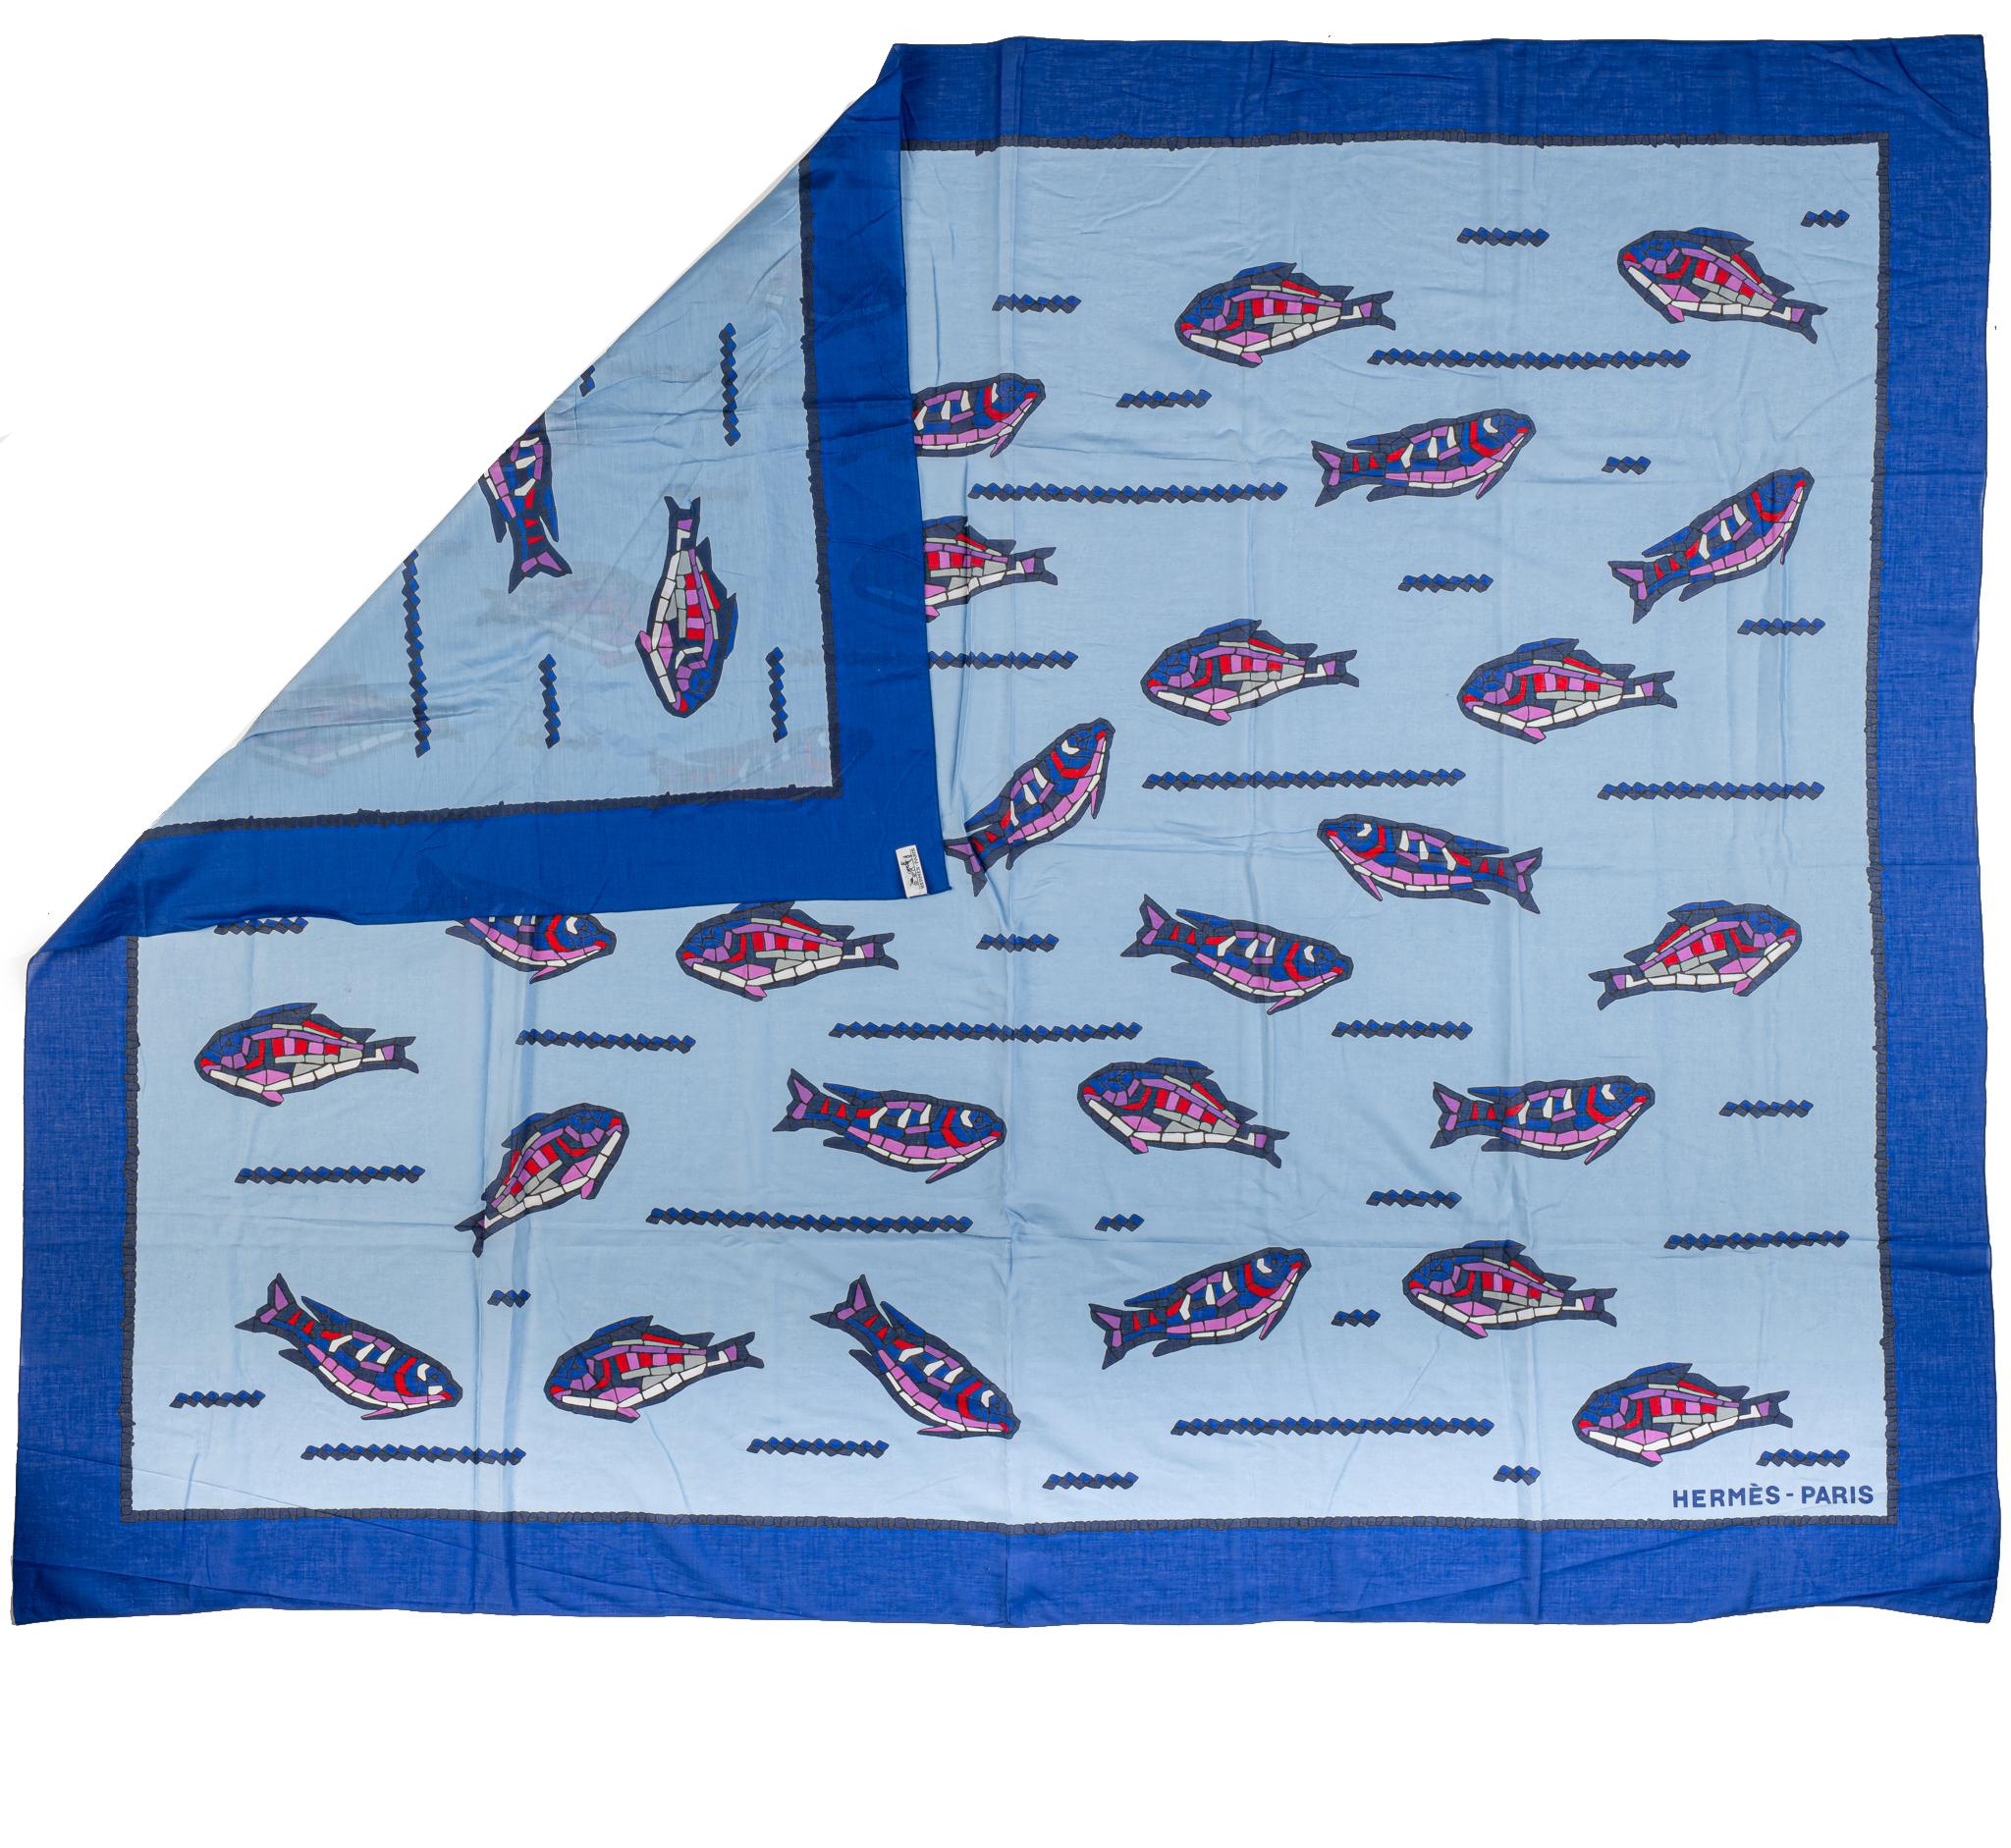 Hermès 100% cotton blue fish design beach sarong. No box, with composition and care instructions label.